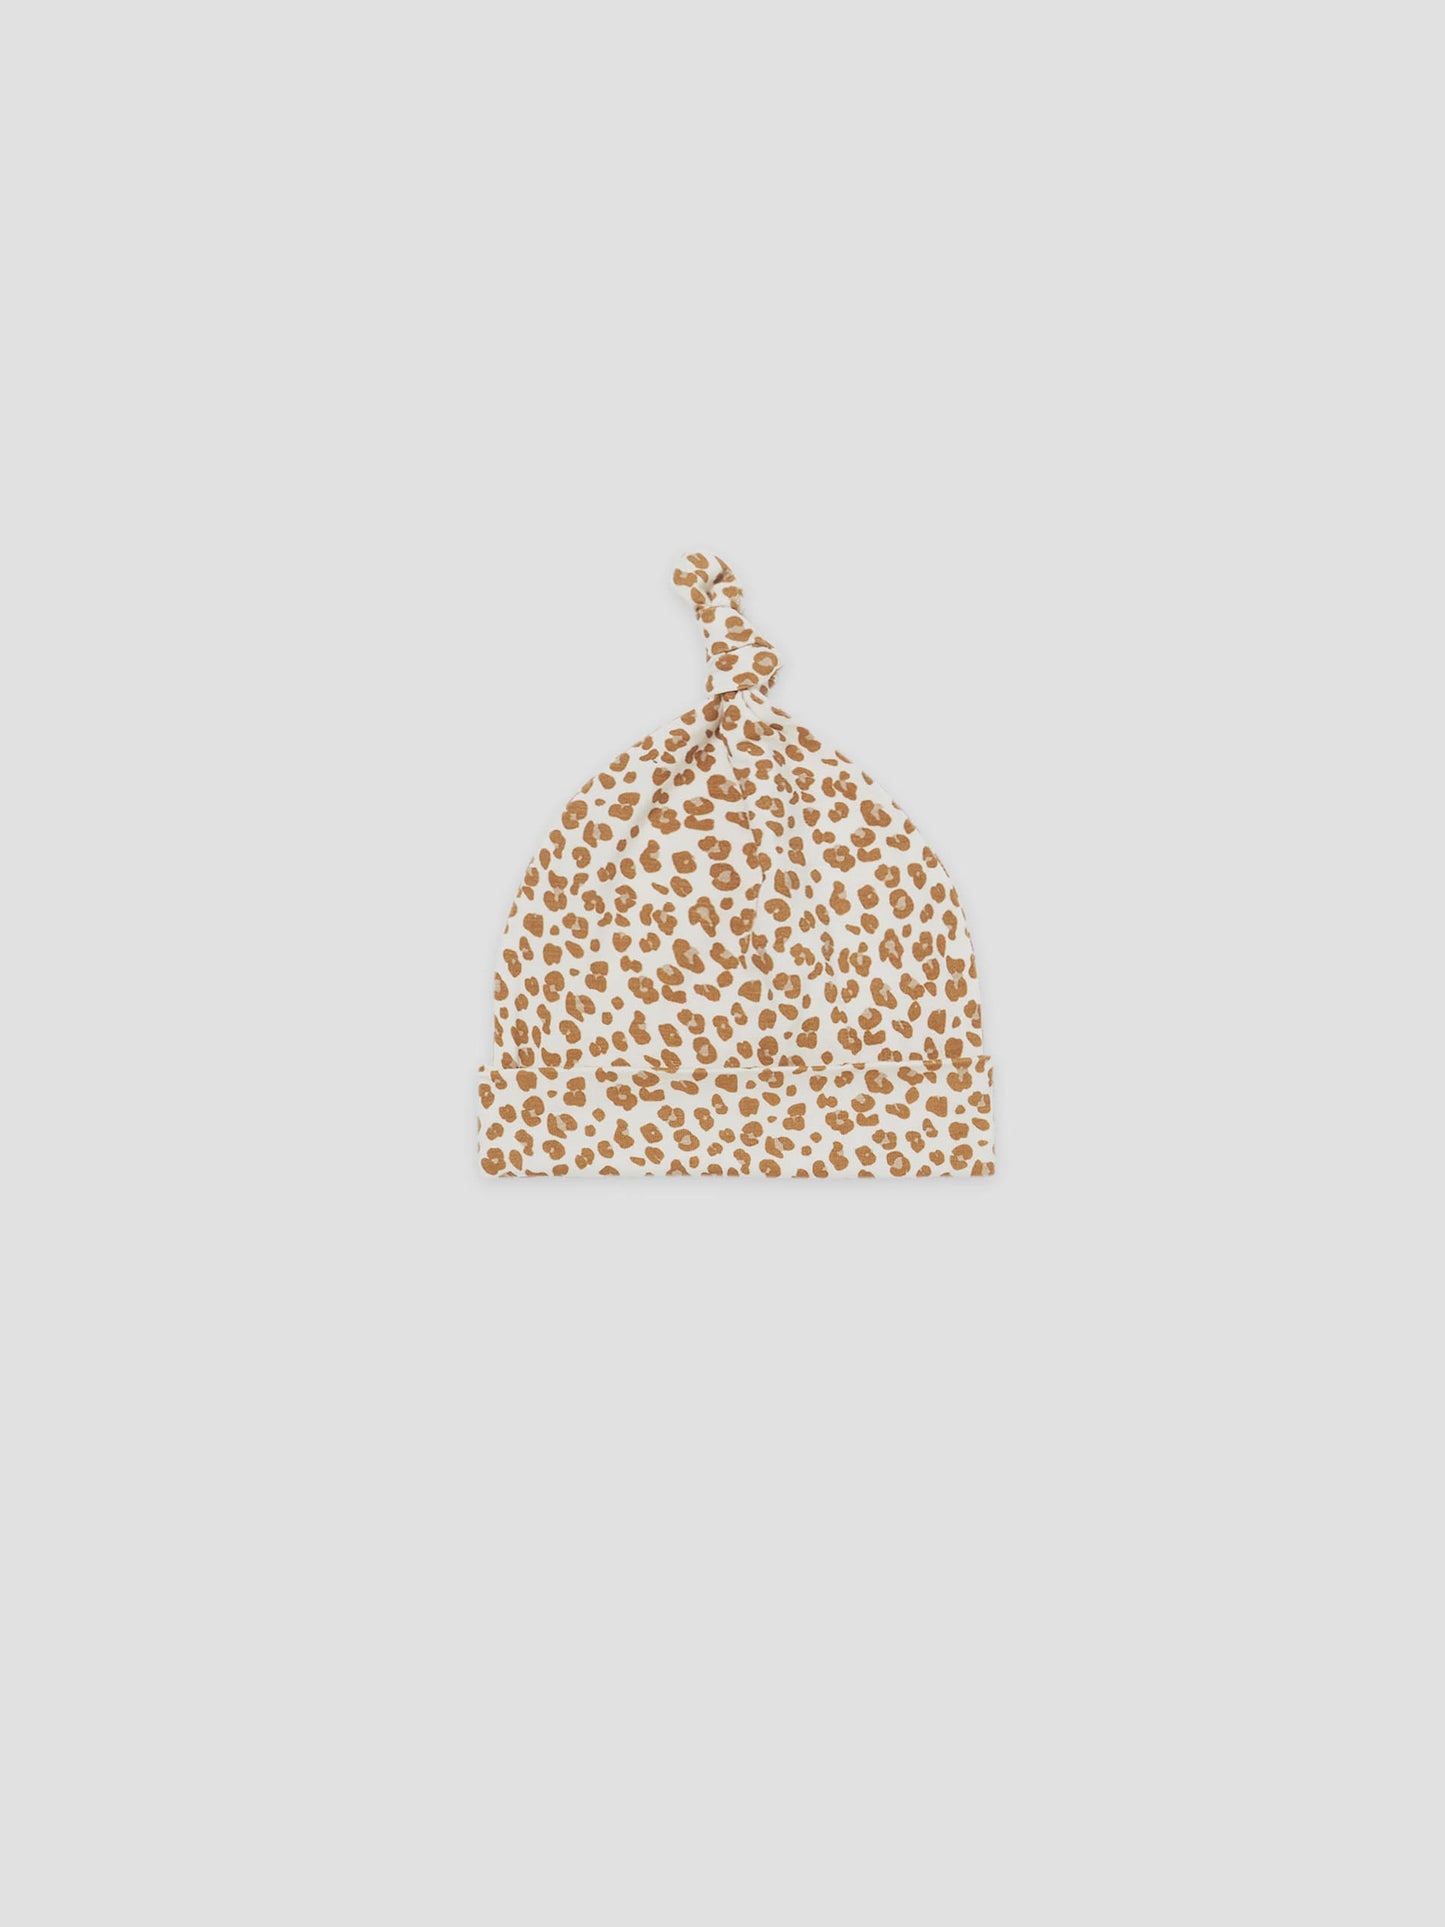 Quincy Mae - Knotted Baby Hat (Cheetah)